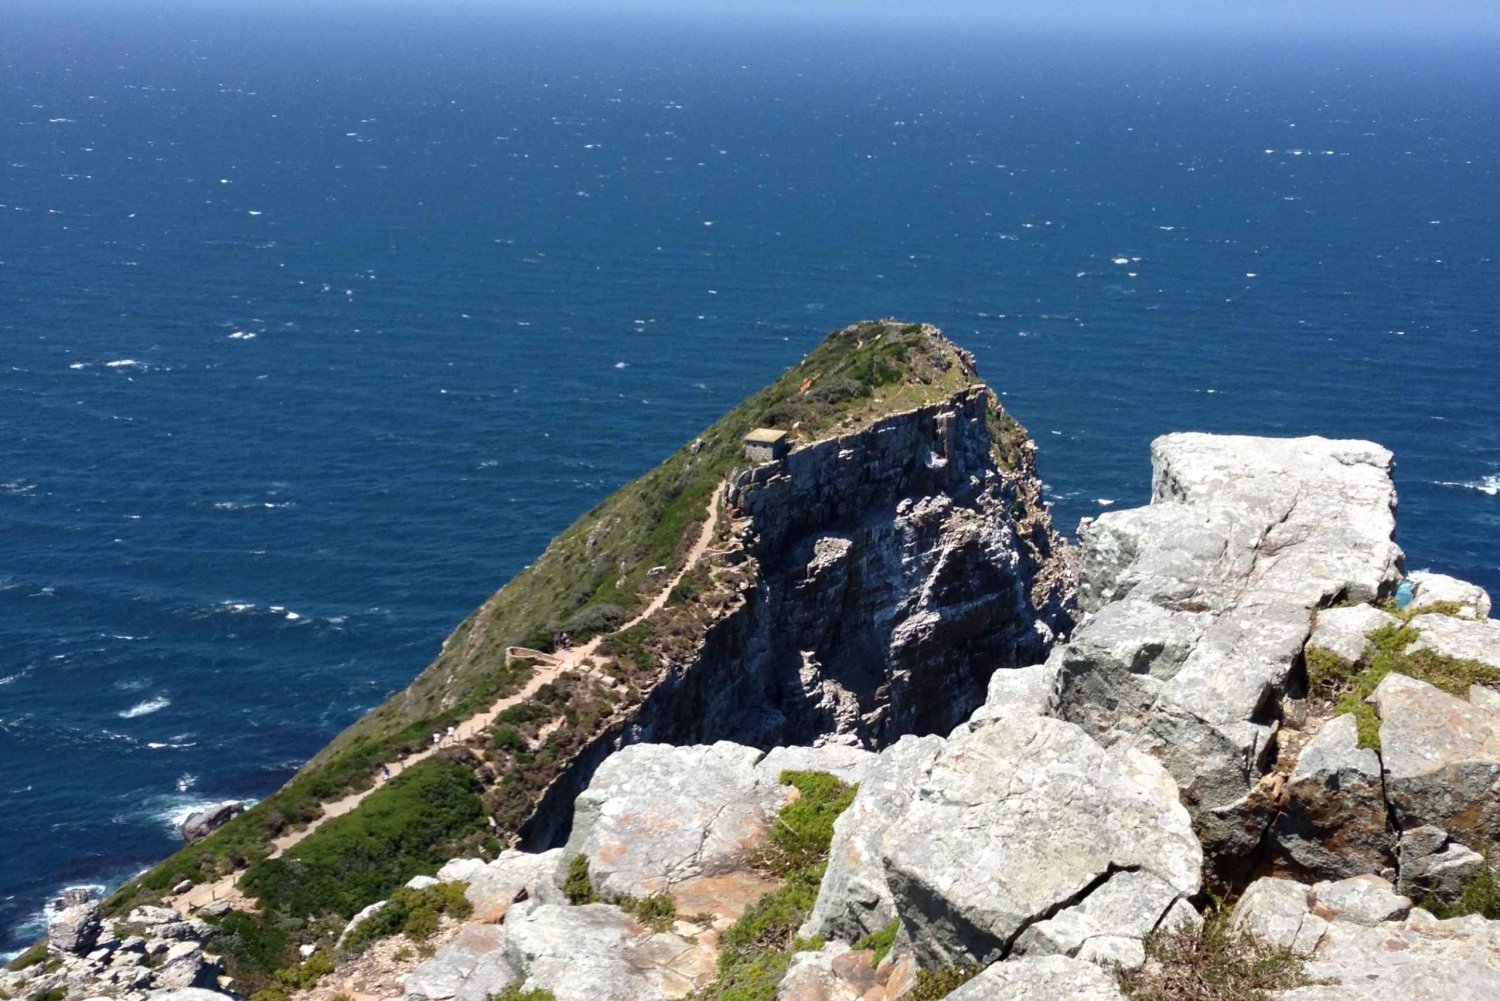 Cape Peninsula: Private Full-Day Tour from Cape Town